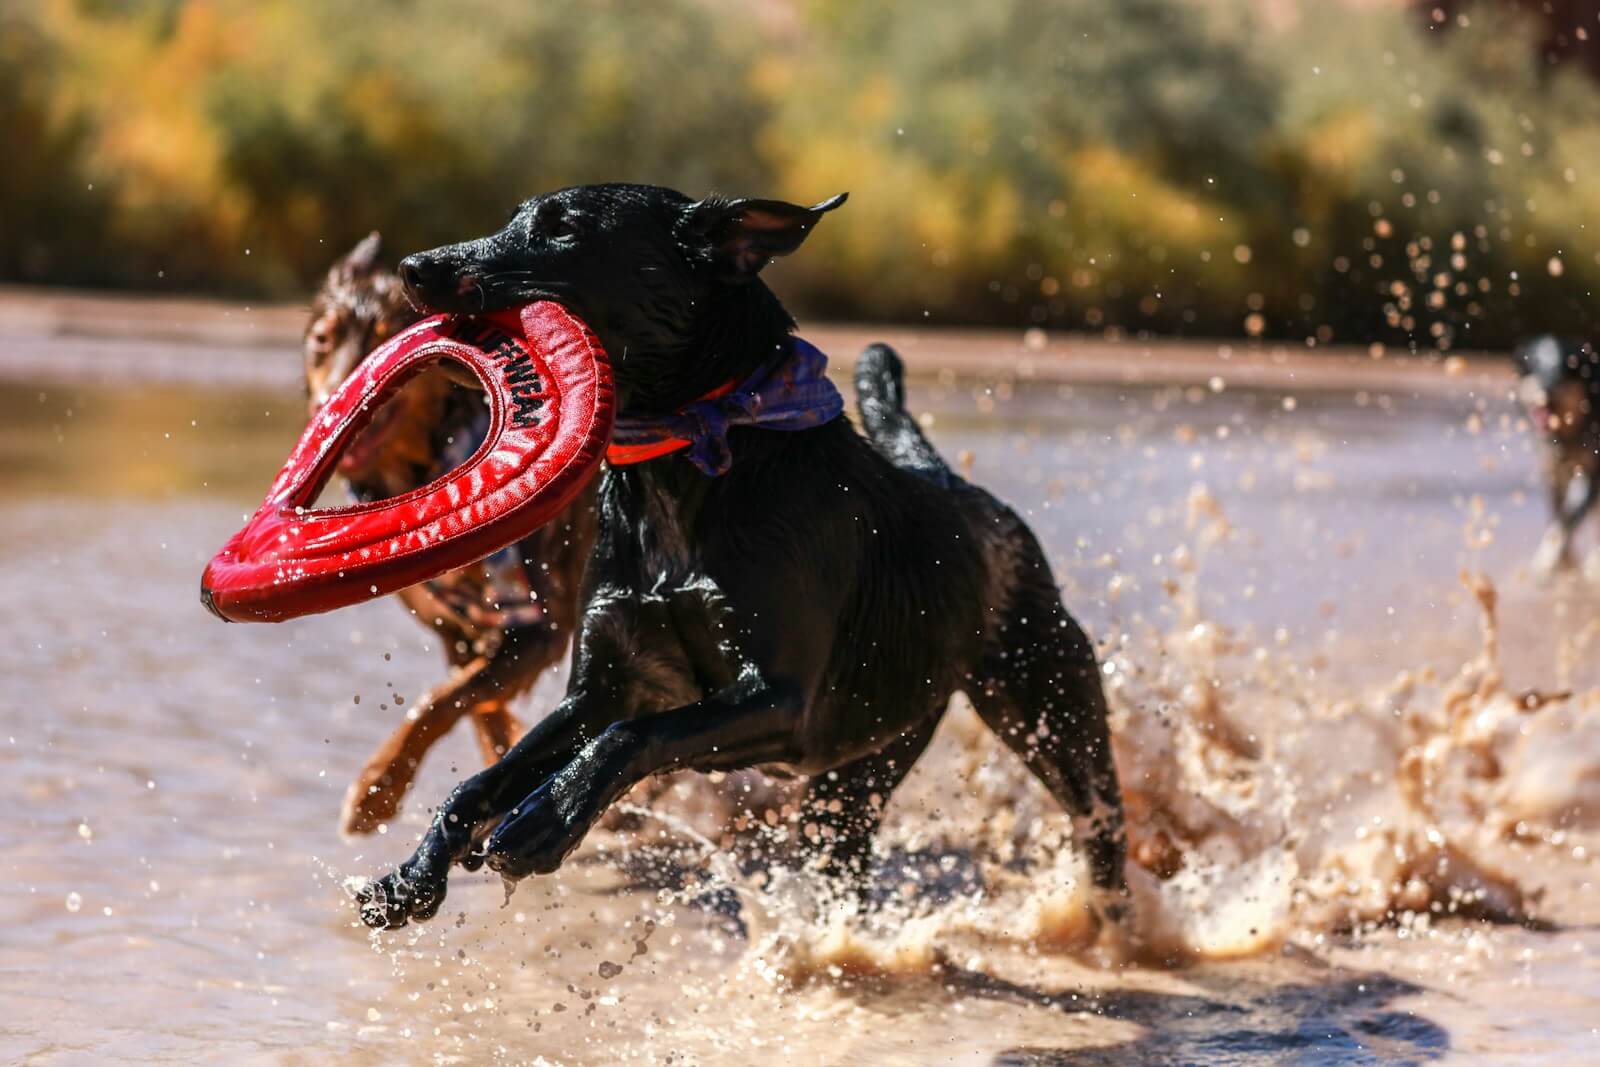 short-coated black dog running on shore while biting round red leather textile during daytime